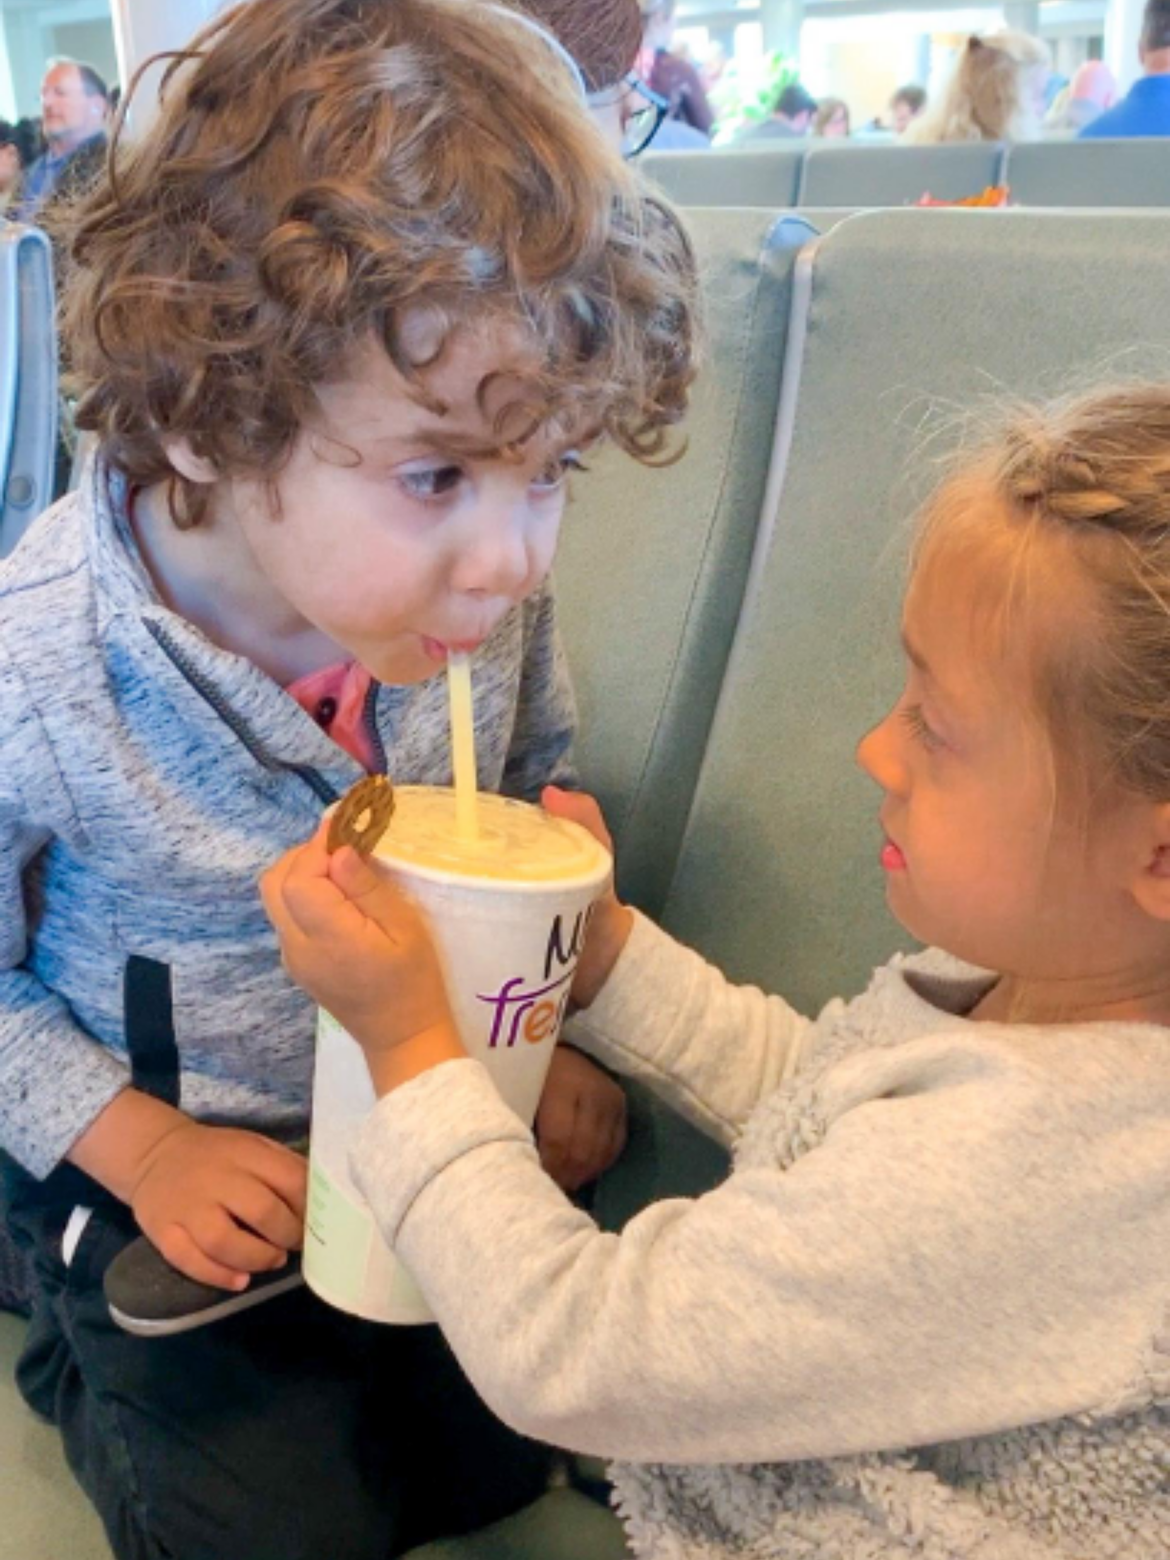 Raff's two kids drinking juice and eating snacks at the airport